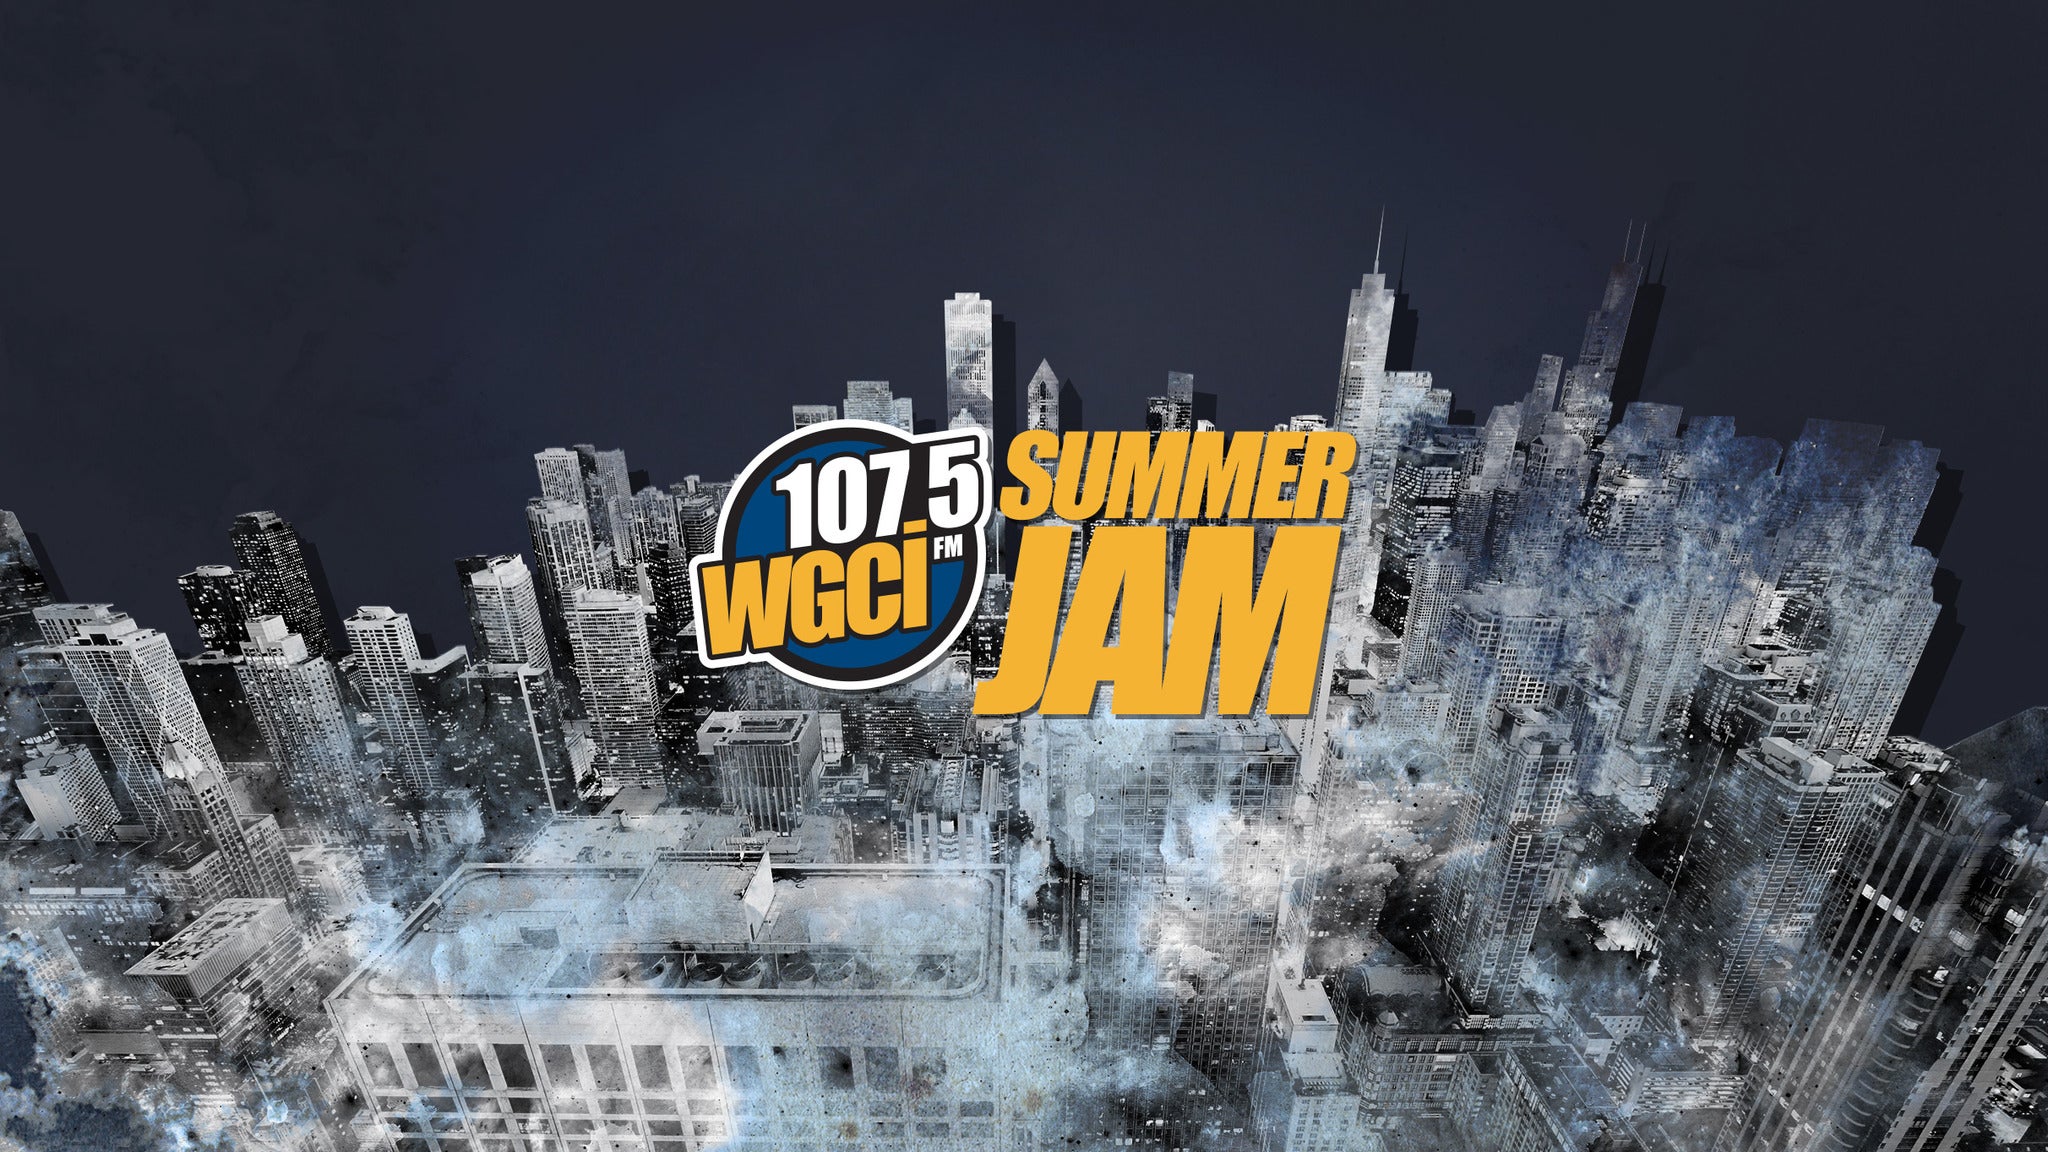 WGCI Summer Jam at Cross Pointe Park on Sep 18, 2022 tickets Eventsfy